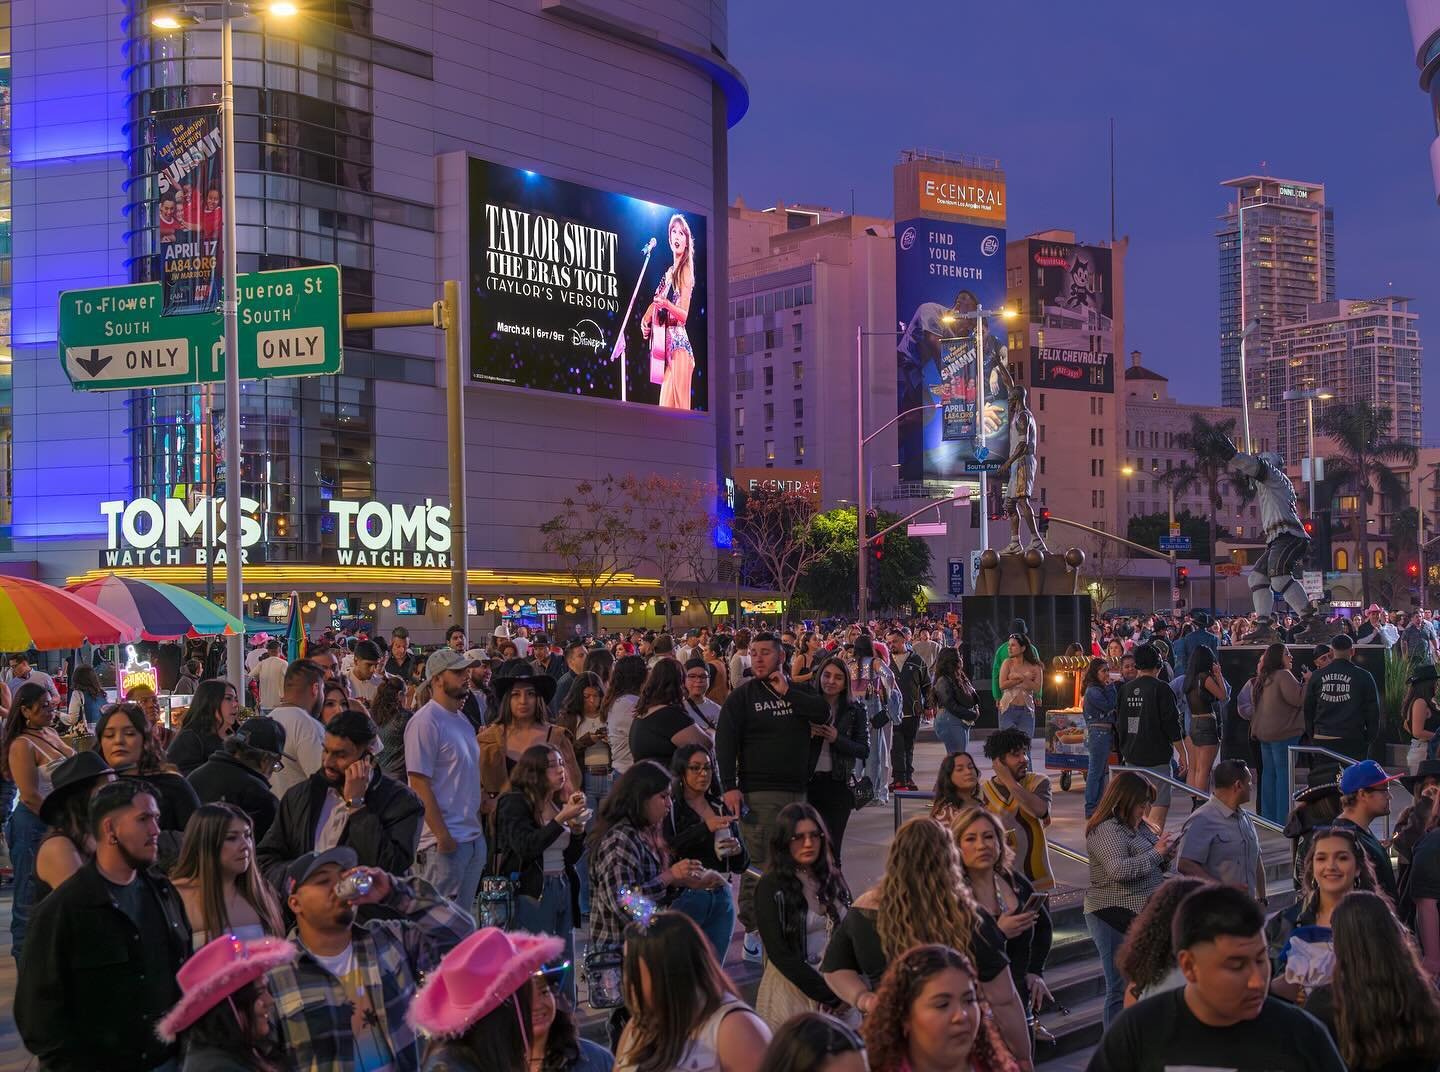 Fig Spectacular sits above the massive crowds in the epicenter of entertainment in DTLA, putting epic campaigns in front of millions of people per month 👀 

#iconicmedia #ooh #dooh #disneyplus #taylorswift #erastour #taylorswifterastour #dtla #taylo